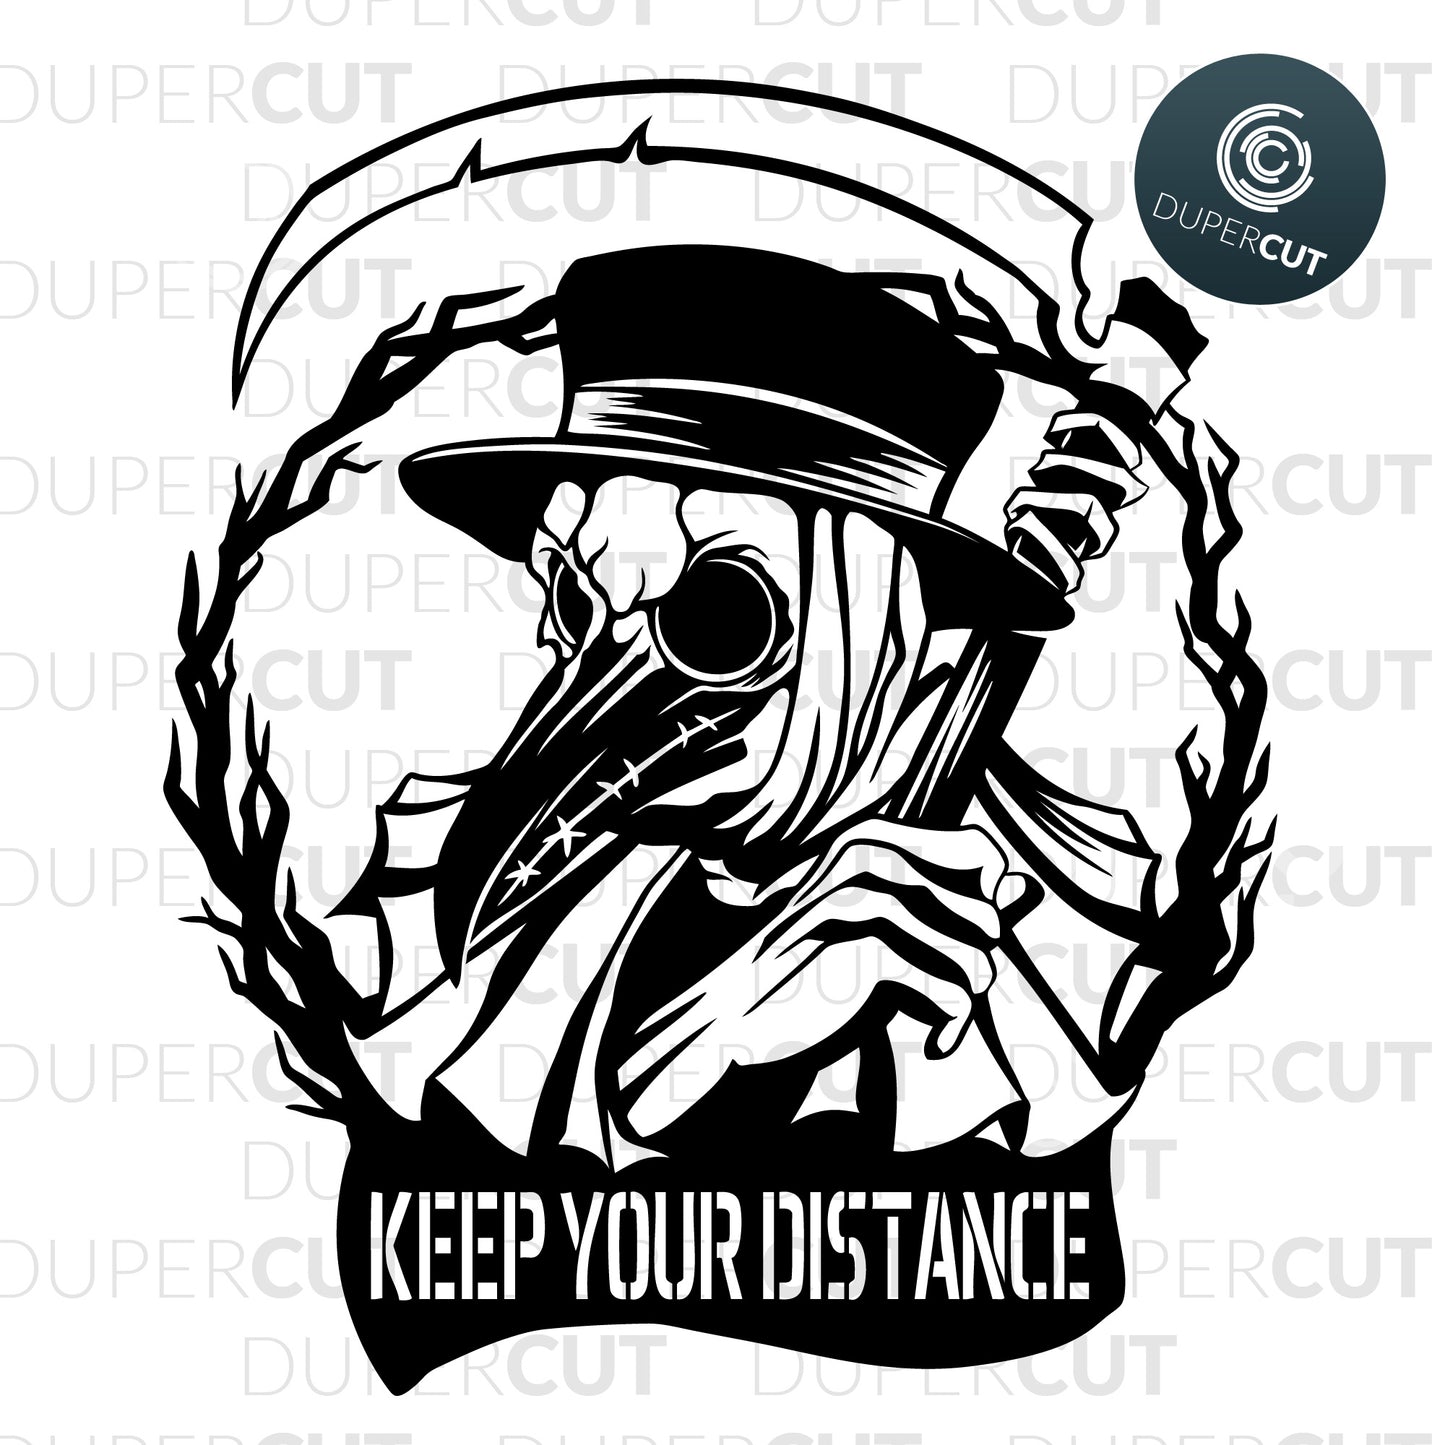 Keep your distance, covid-19 custom sign, plague doctor  - SVG DXF JPEG files for CNC machines, laser cutting, Cricut, Silhouette Cameo, Glowforge engraving